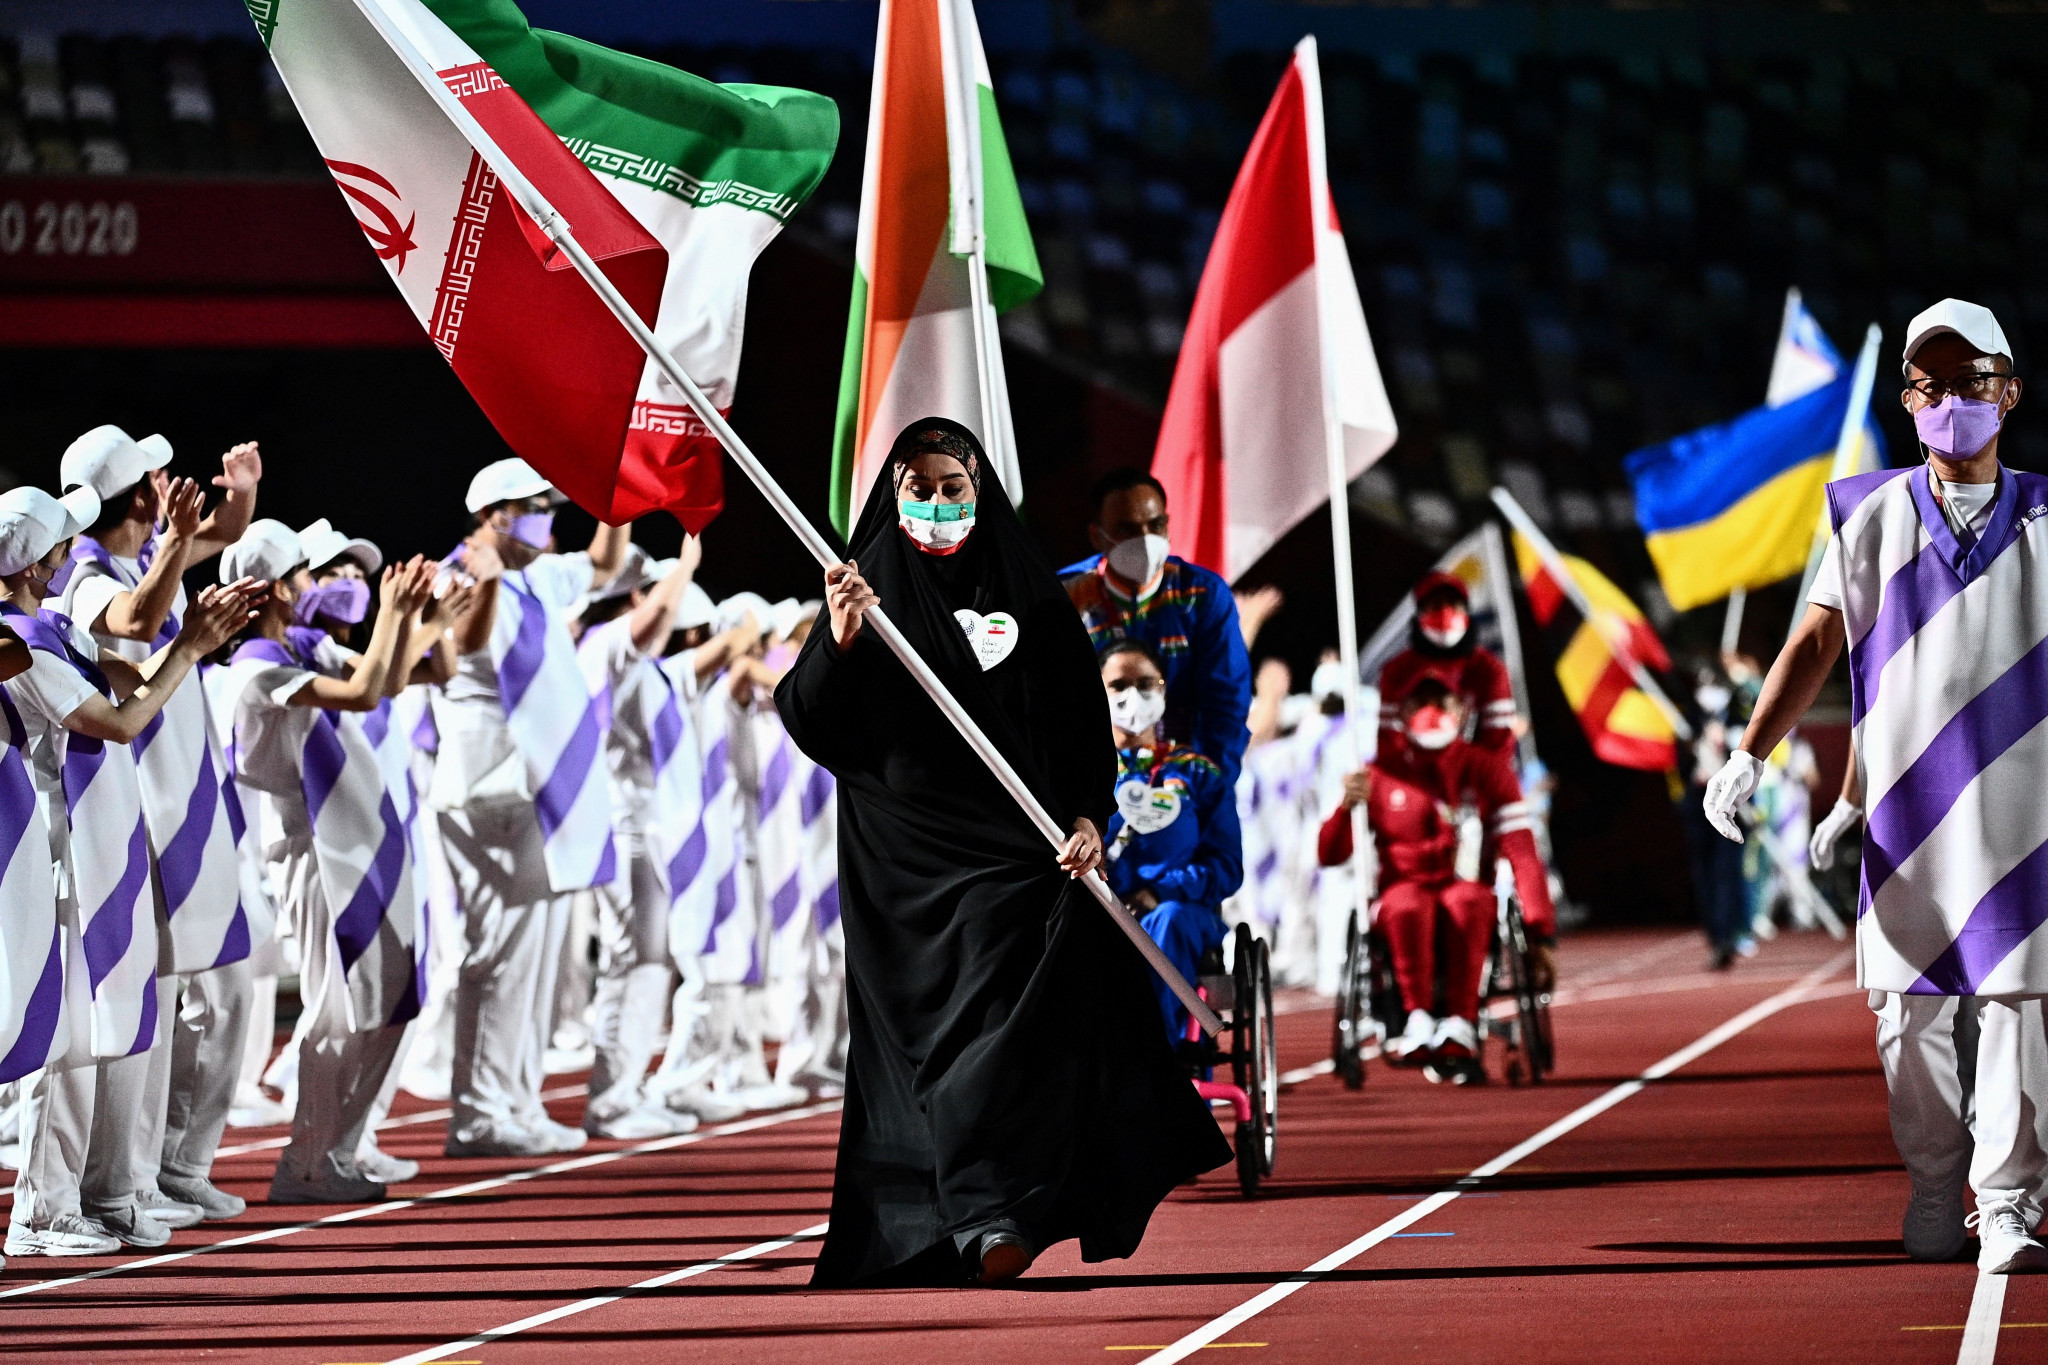 Iran is ready to host international Para sports events following a successful 15th National Paralympic Day according to the country's Minister of Sports and Youth Affairs ©Getty Images